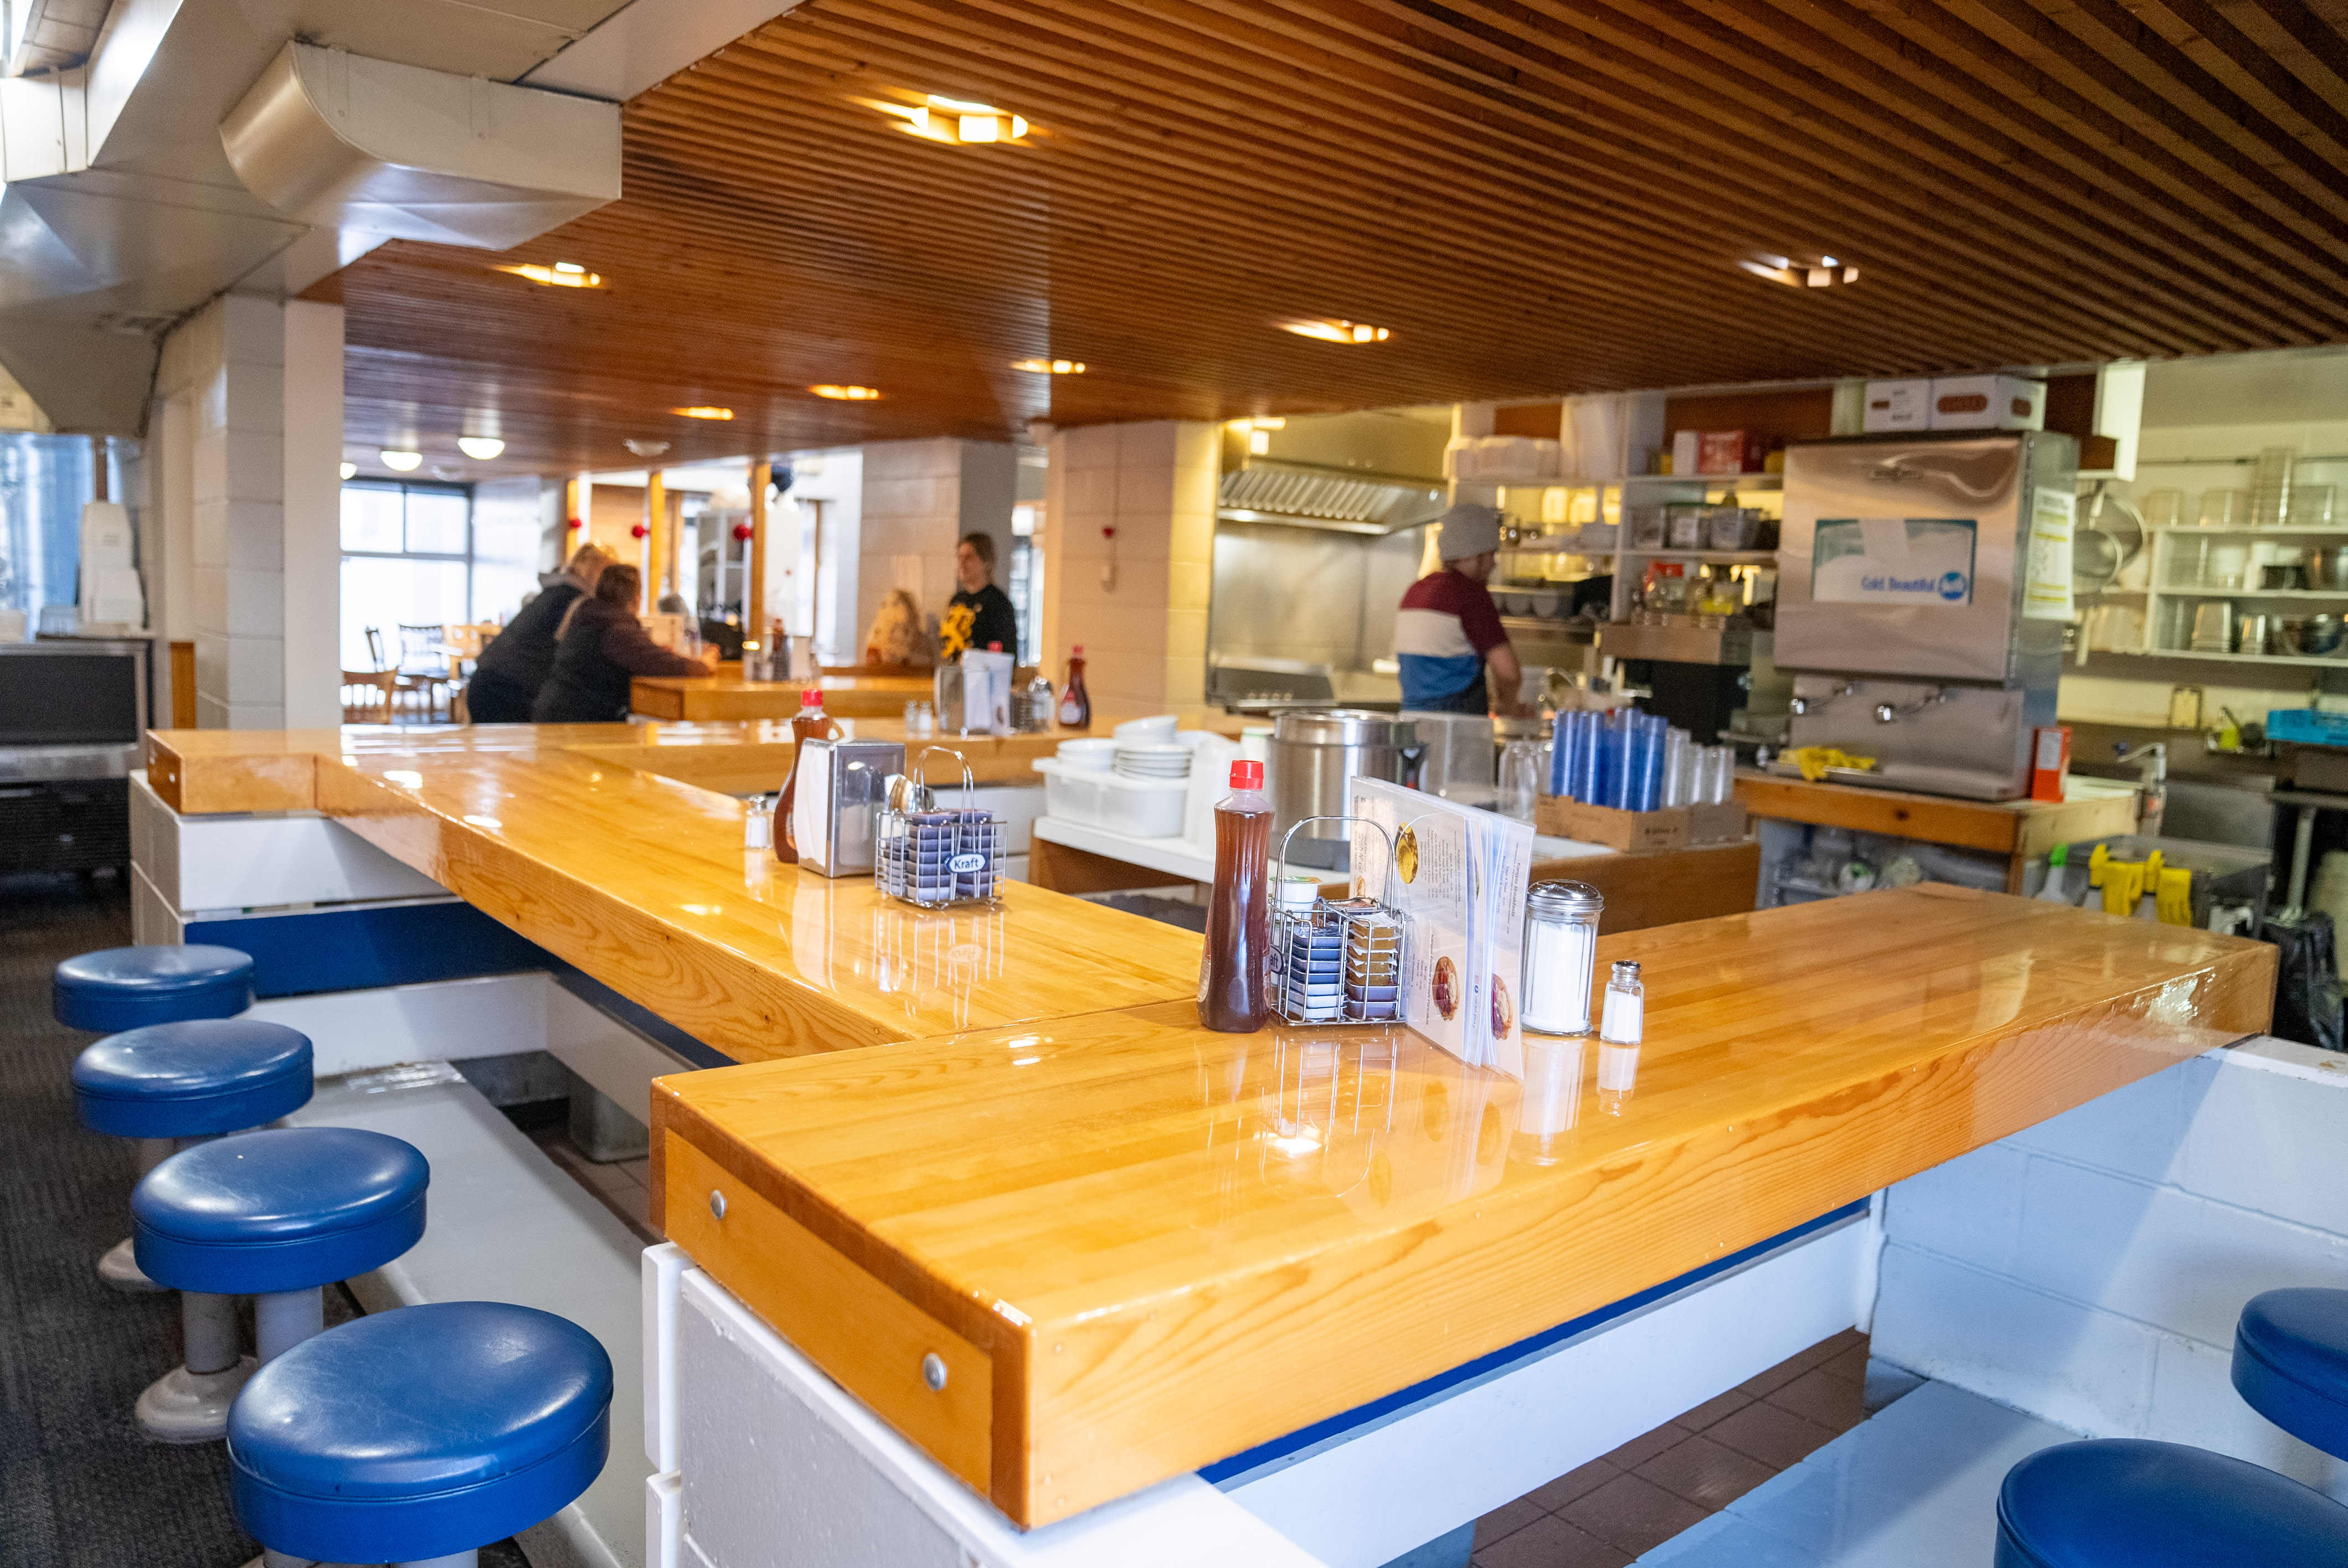 the cafe at Kanga's Sauna, Thunder Bay; a well-lit and shiny, inviting wooden breakfast bar surrounded by blue stools and adorned with condiment jars, with customers ordering at a chef's counter in the background.